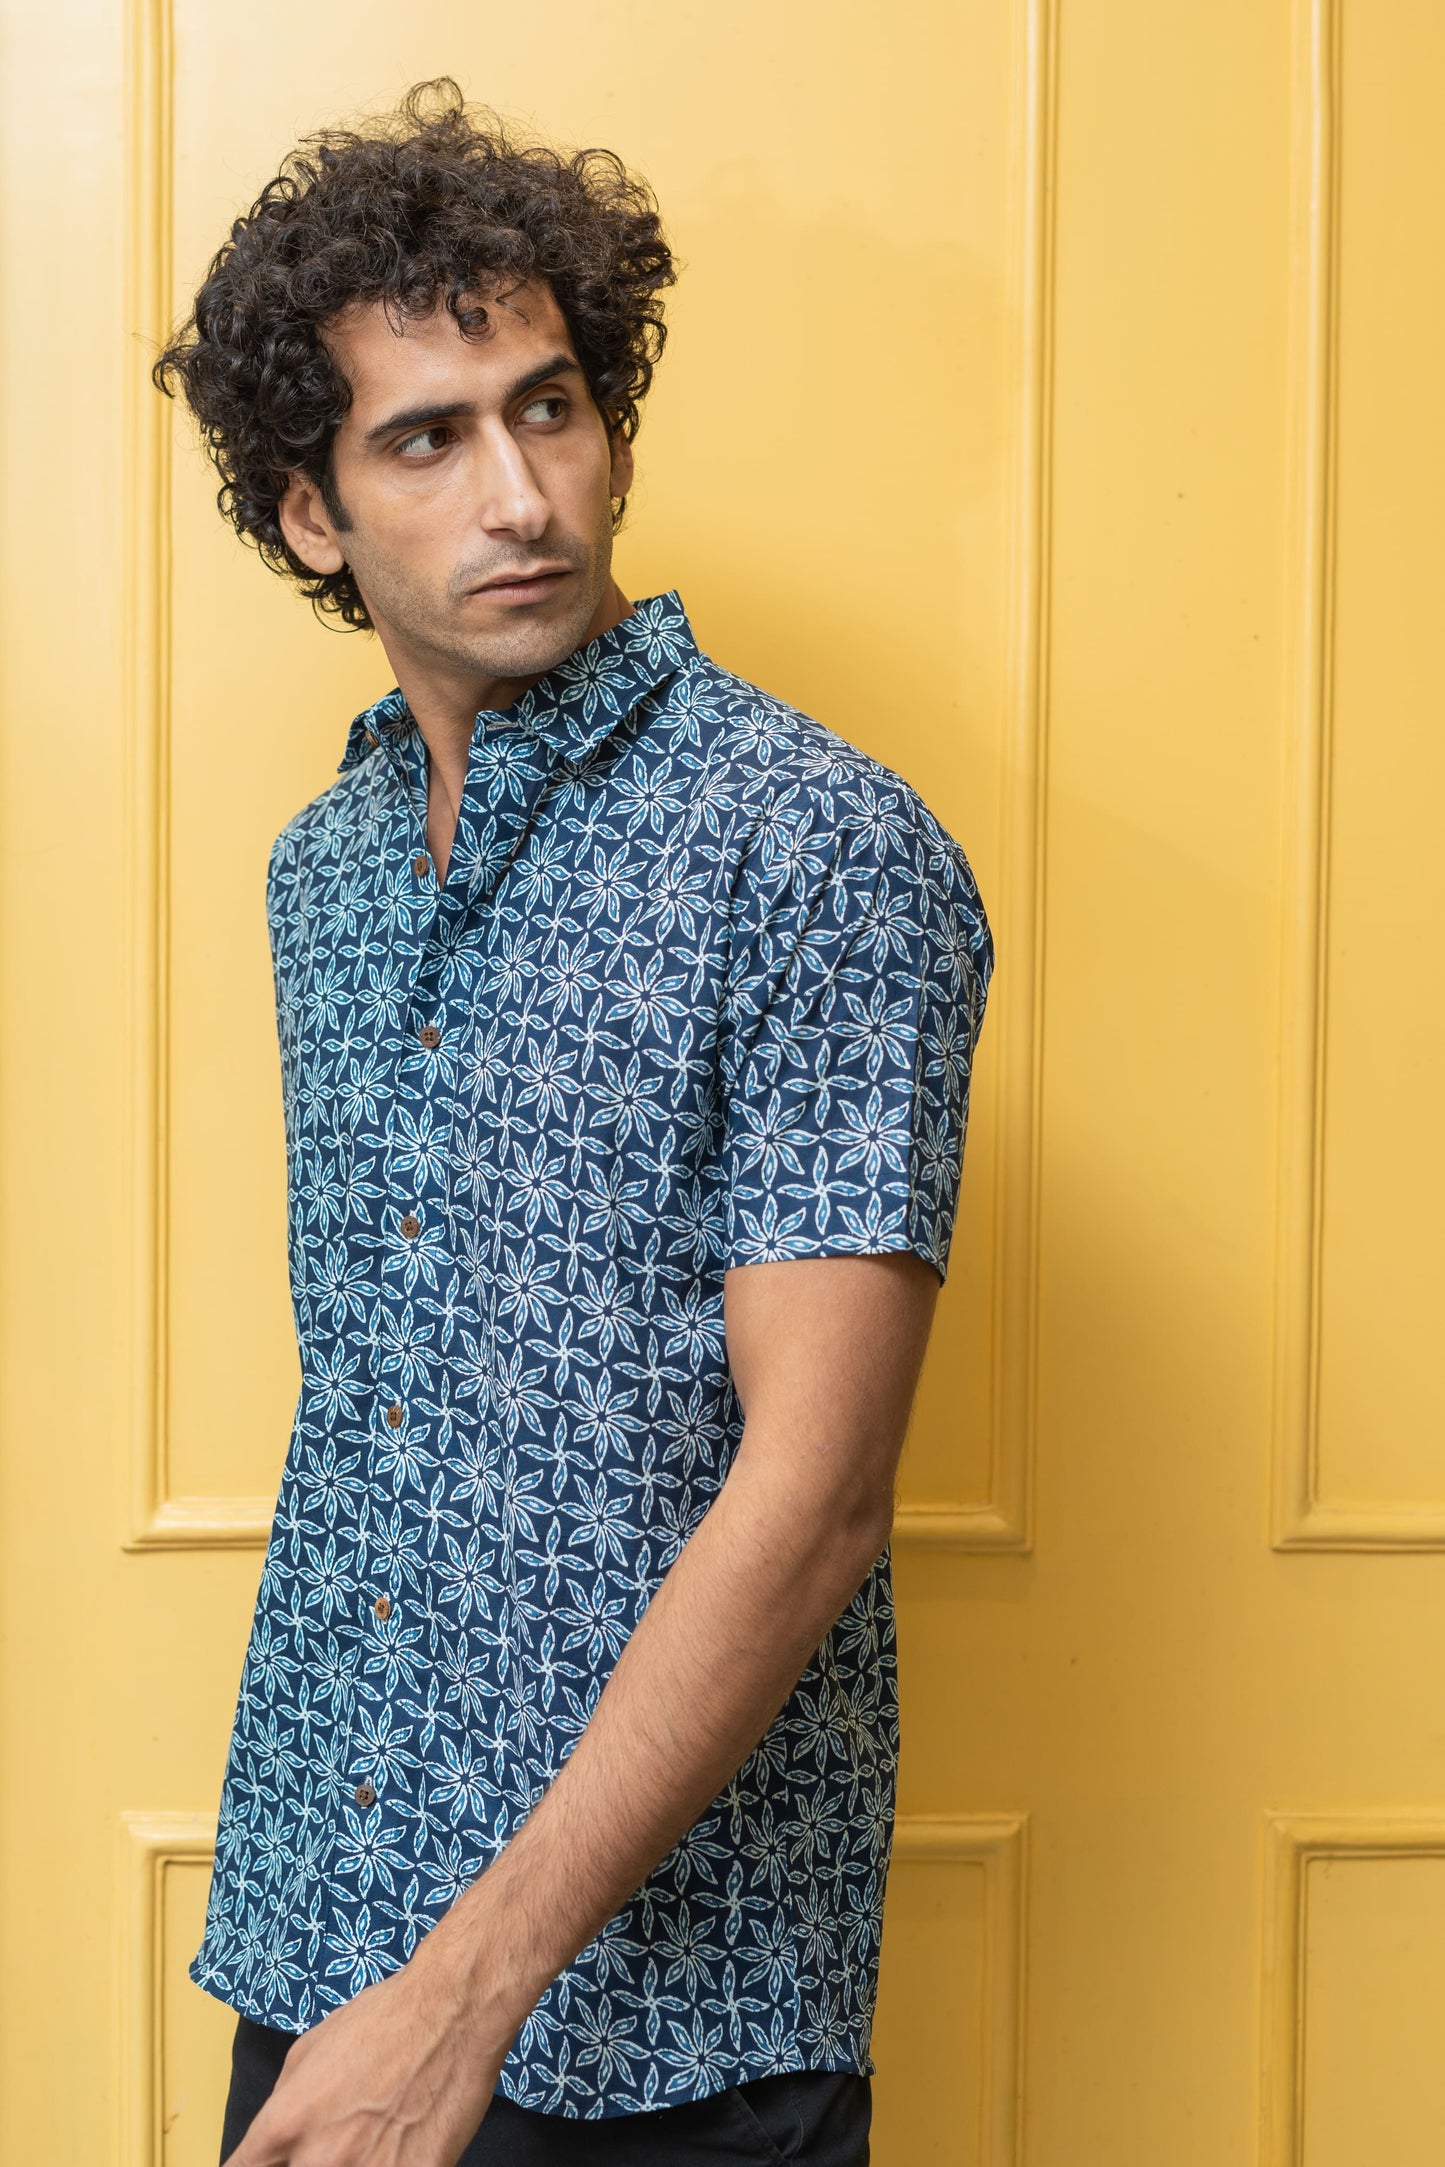 The Navy Blue All-Over Floral Print Half Sleeves Shirt